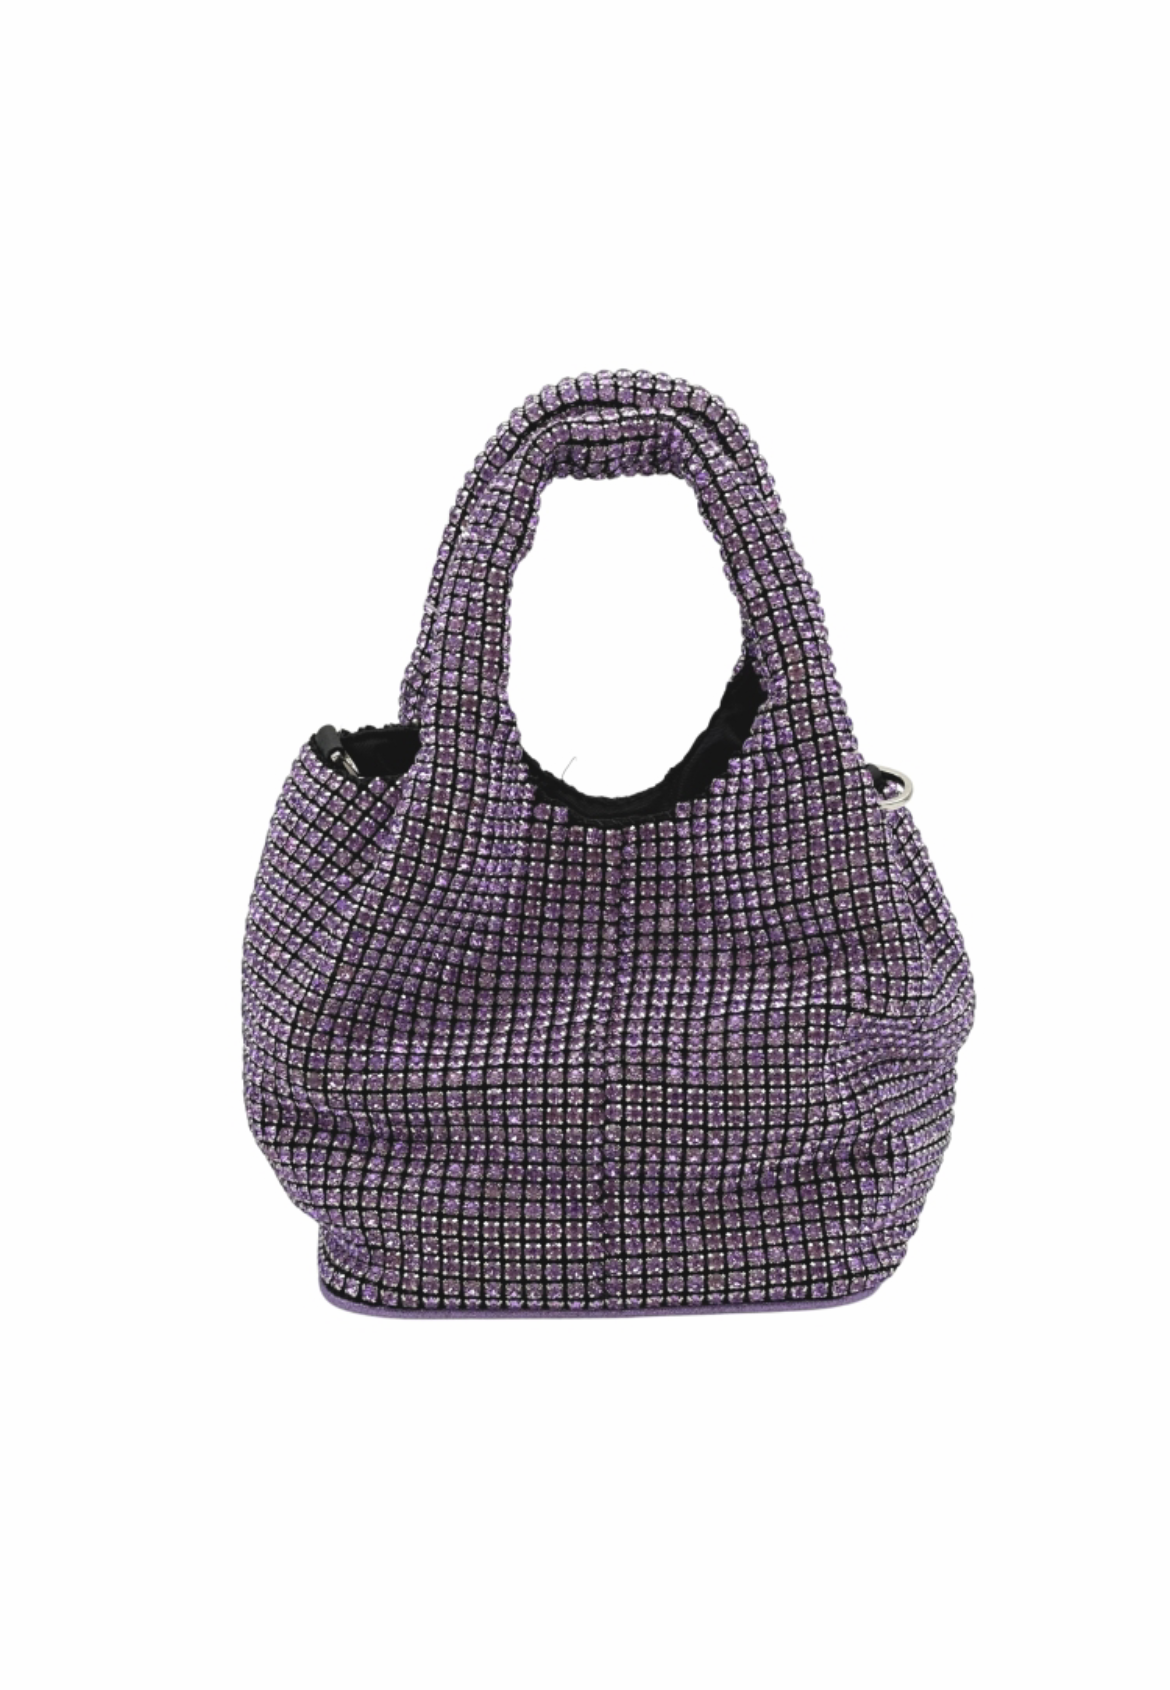 LILY - Crystal Bag in Lila